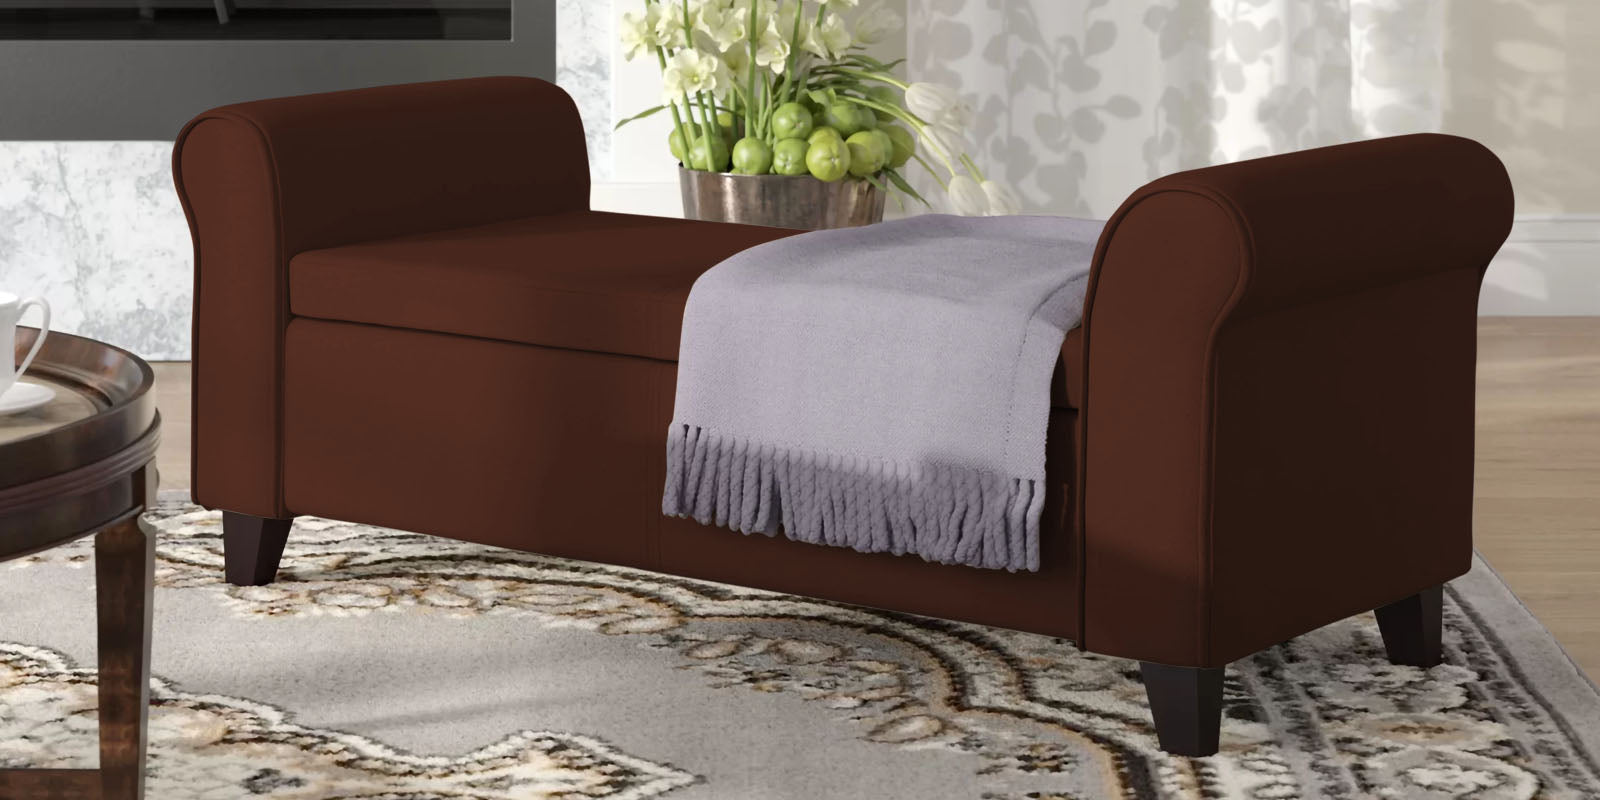 Molo Fabric 3 Seater Reclaimer in Coffee Brown Colour With Storage